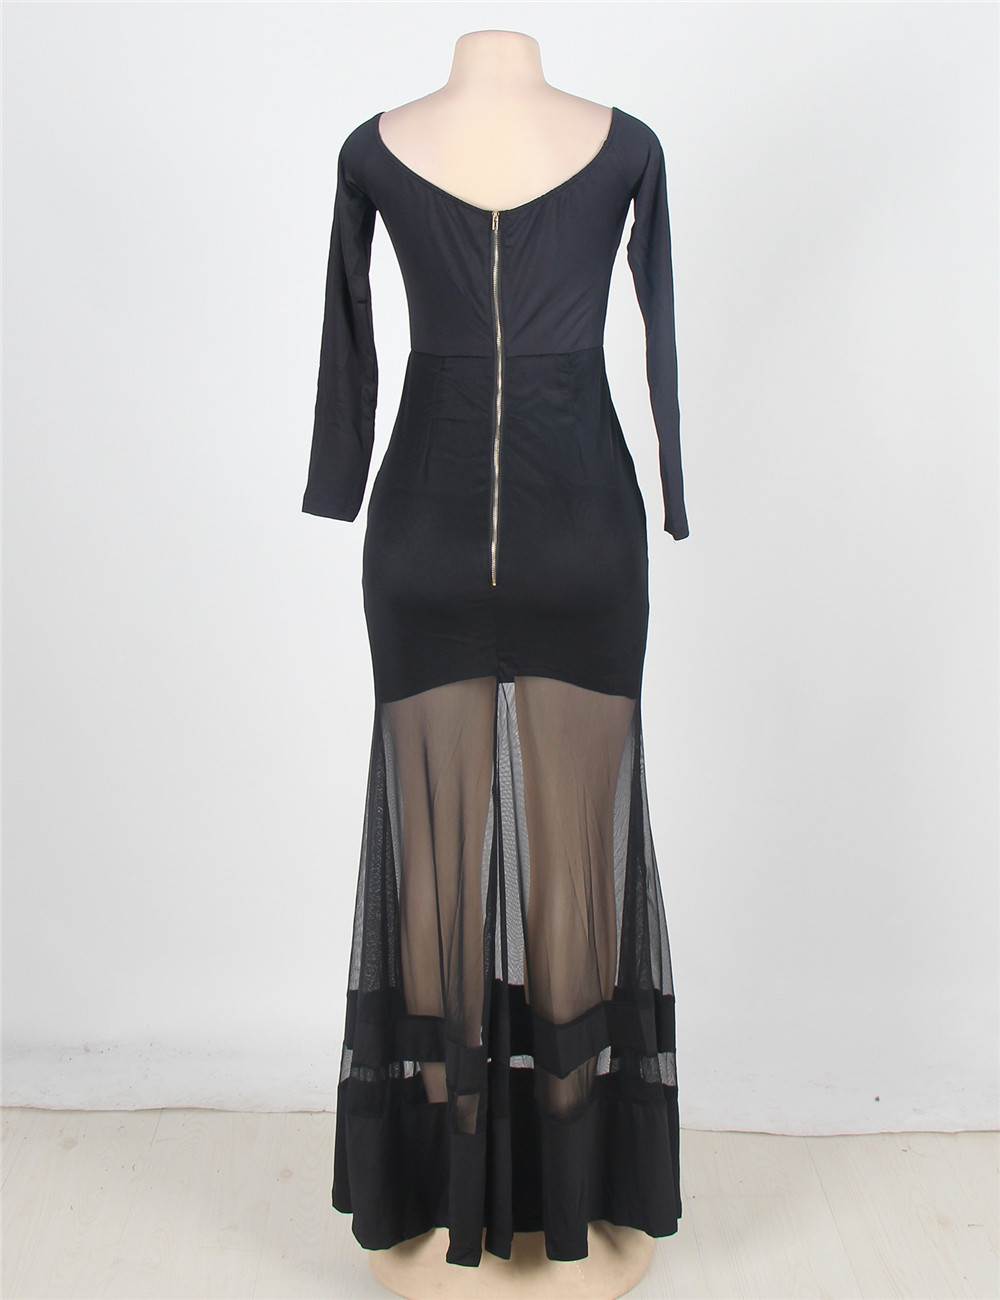 black dress with clear sleeves